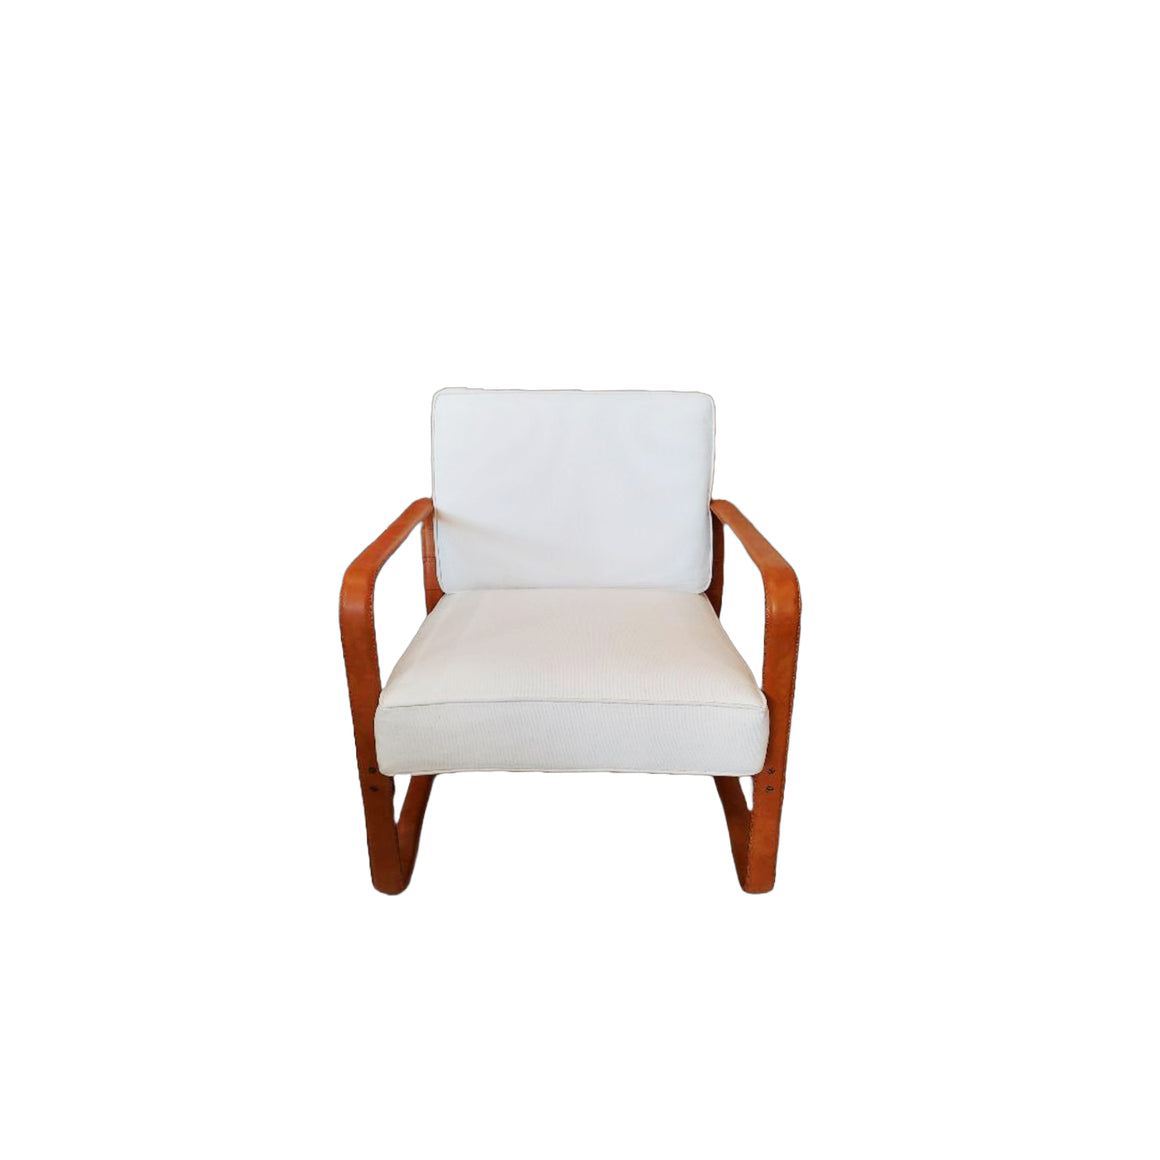 Pair of Ralph Lauren Home Cliff House Lounge Chairs